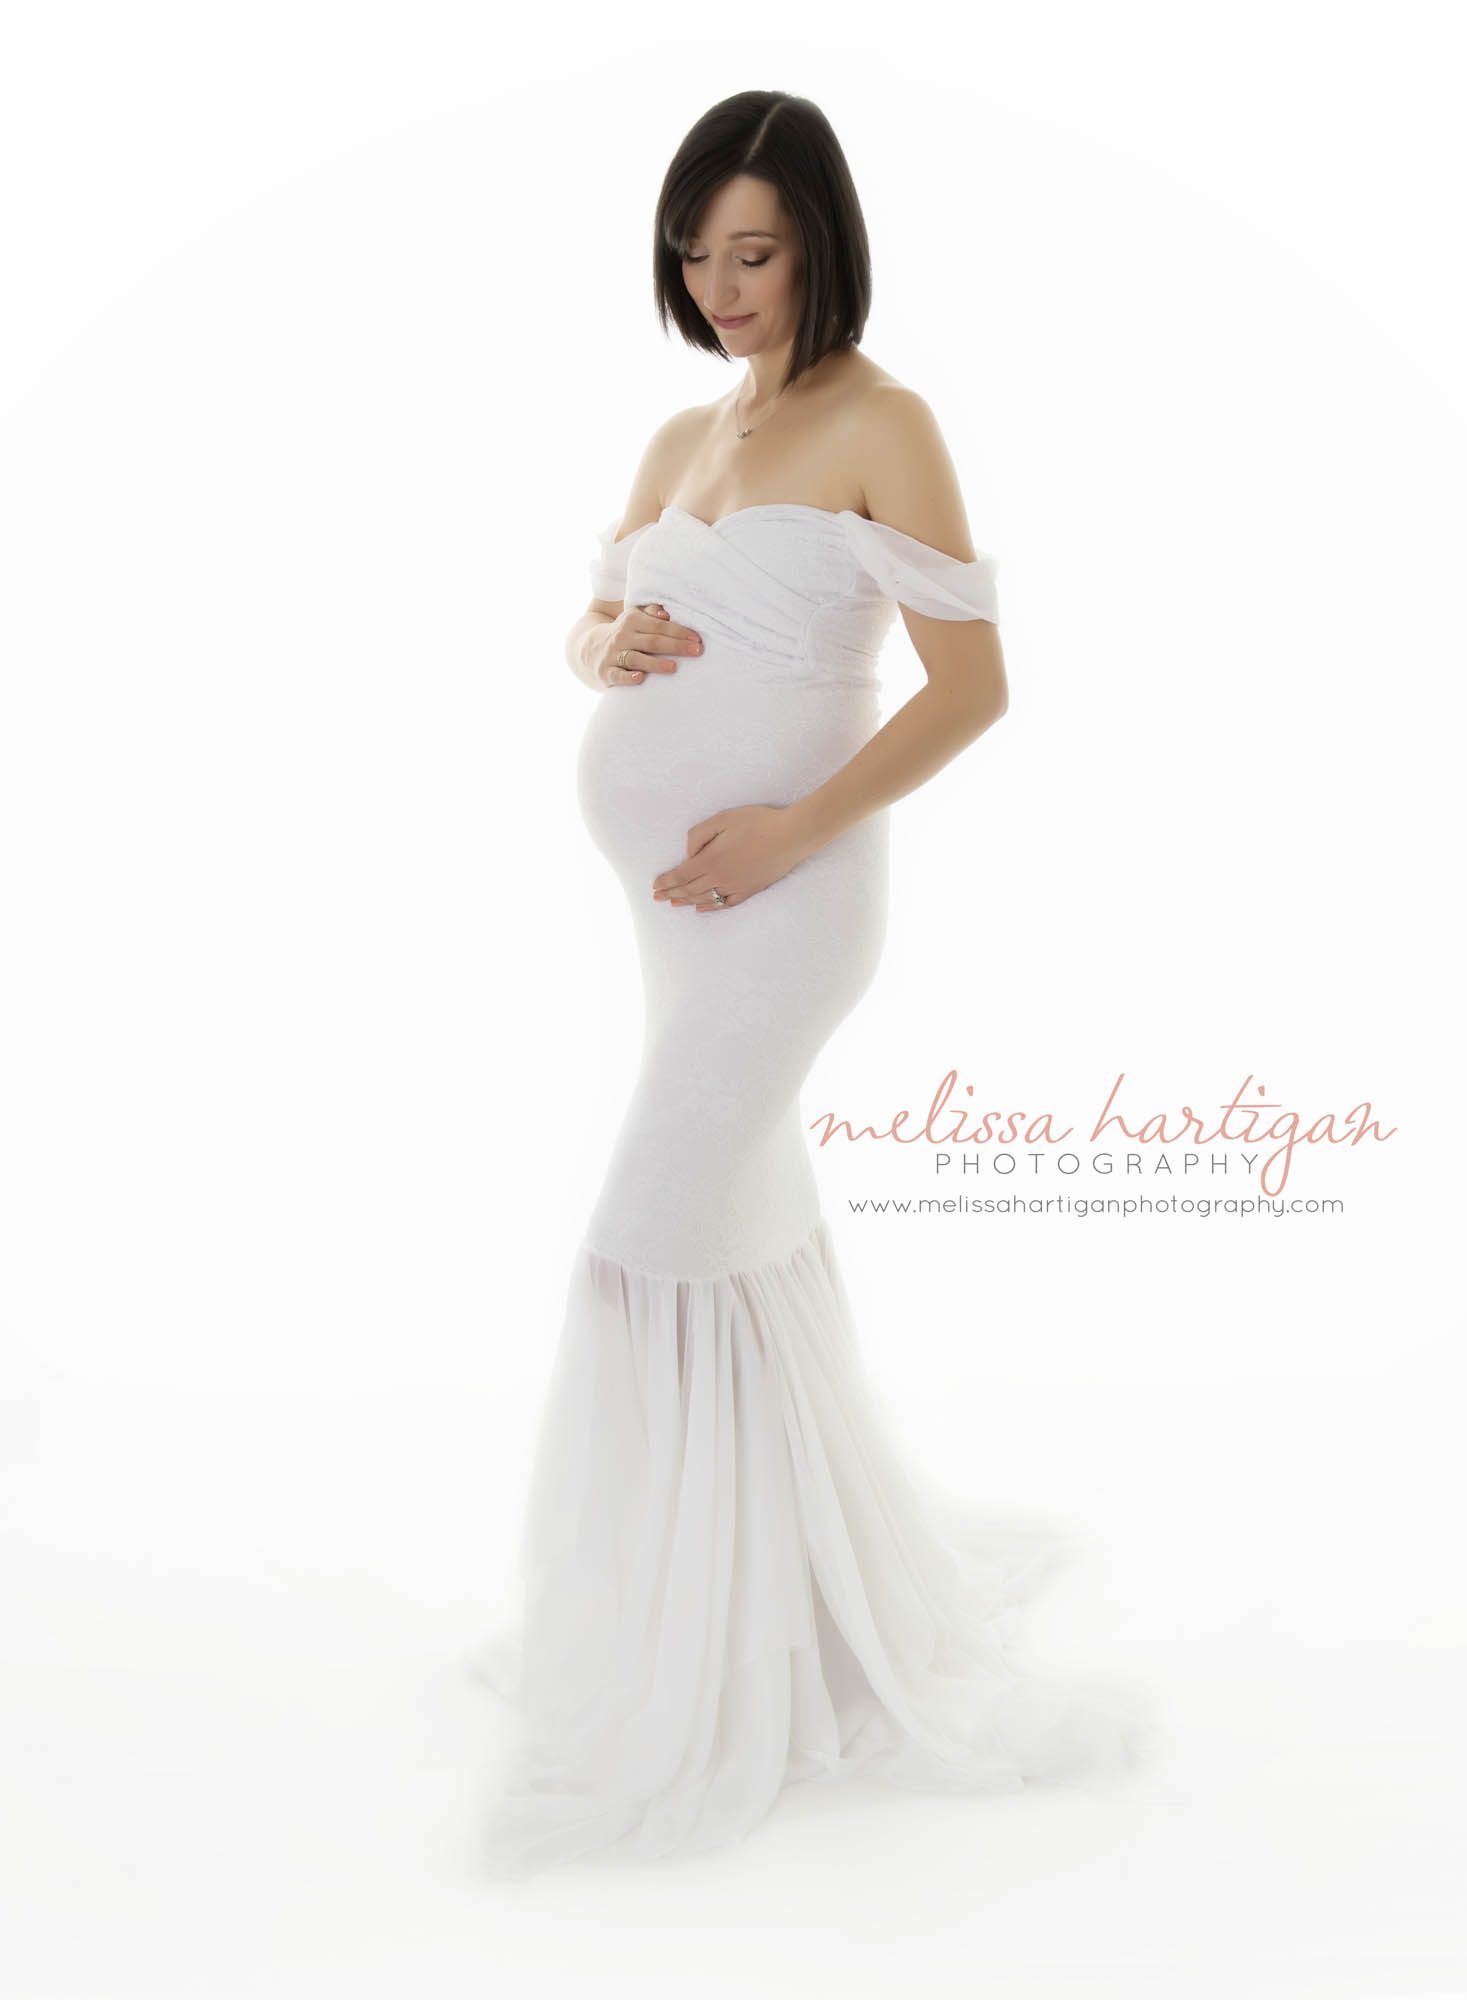 CT Maternity Photographer maternity pose mom cradling baby bump in white dress